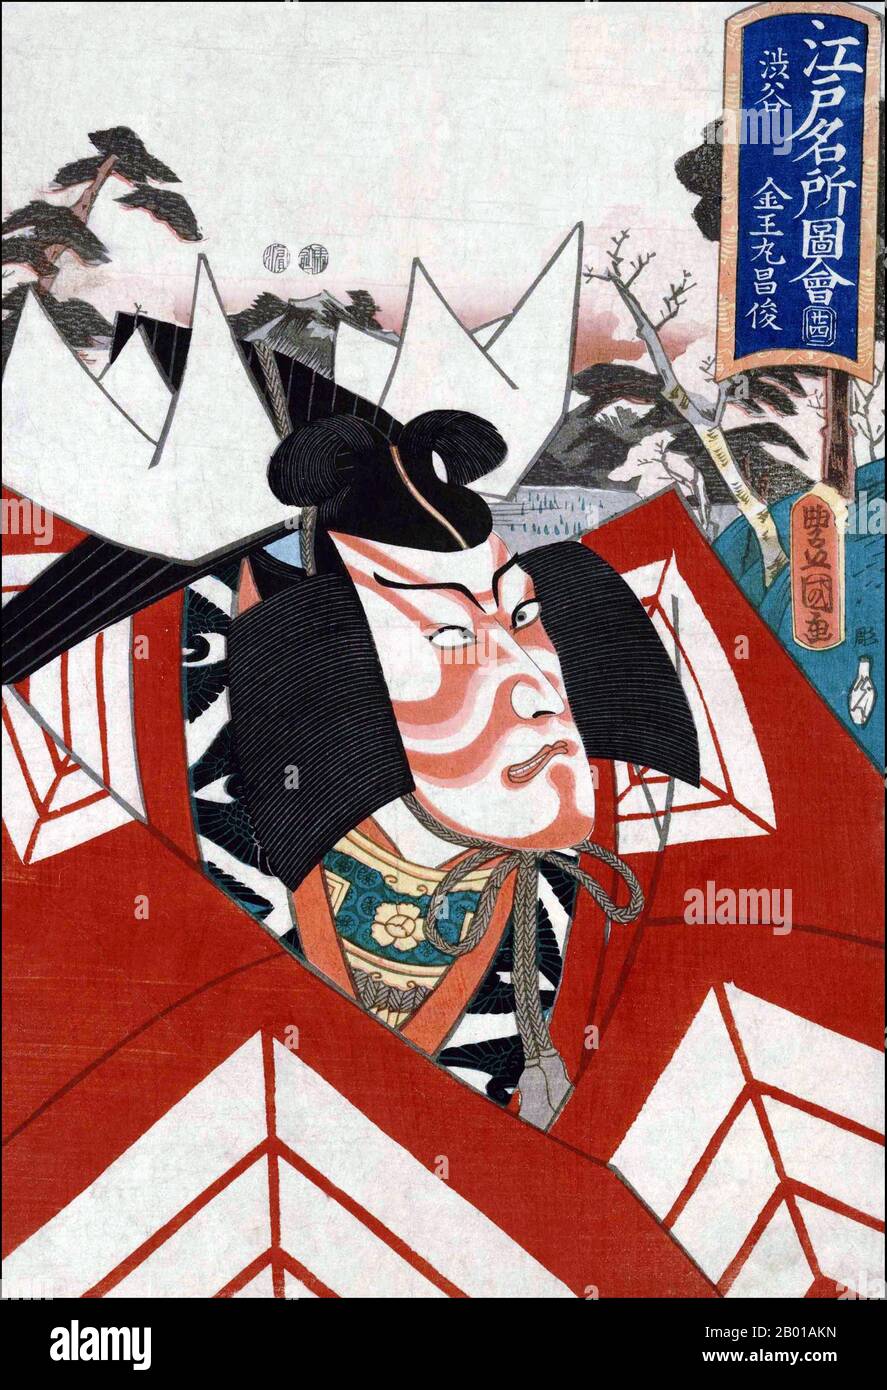 Japan: An actor playing the role of Kaneomaru. Ukiyo-e woodblock print by Utagawa Kunisada (1786 - 12 January 1865), c. 1830.  Utagawa Kunisada, also known as Utagawa Toyokuni III, was the most popular, prolific and financially successful designer of ukiyo-e woodblock prints in 19th-century Japan. In his own time, his reputation far exceeded that of his contemporaries, Hokusai, Hiroshige and Kuniyoshi. Stock Photo